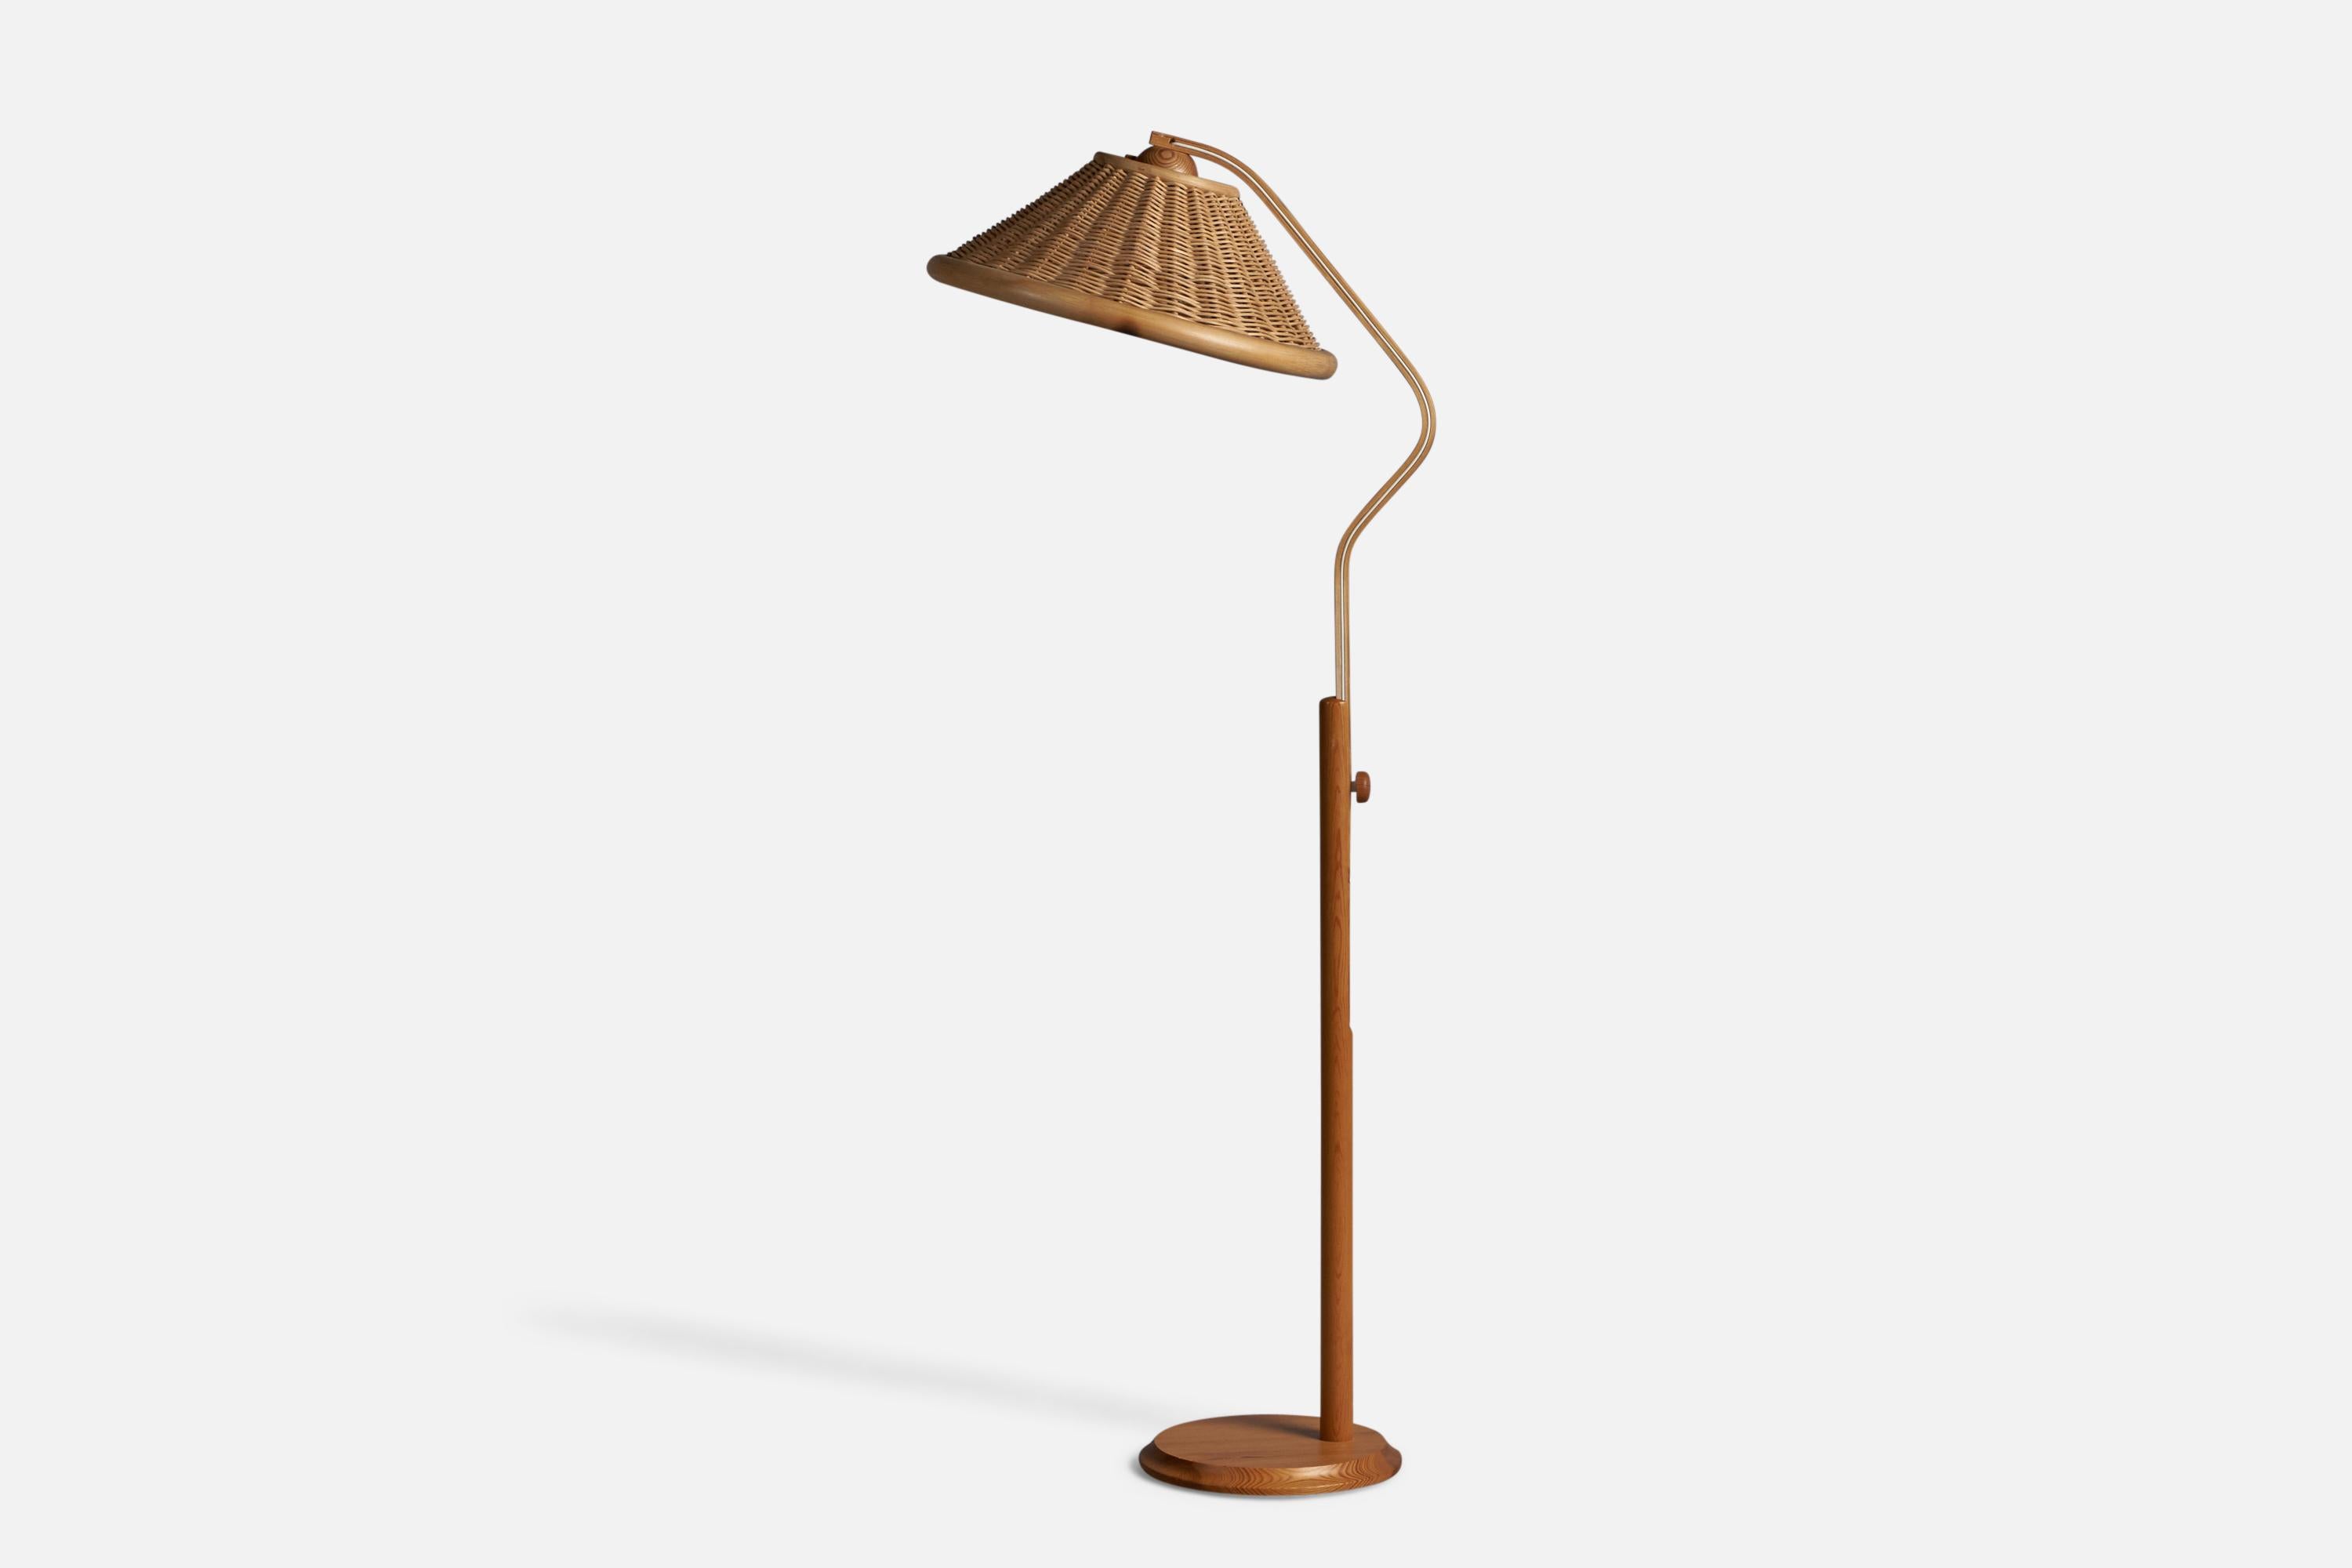 An adjustable pine, bentwood, bamboo and rattan floor lamp, designed and produced by Solbackens Svarveri, Sweden, c. 1970s.

Overall Dimensions (inches): 57